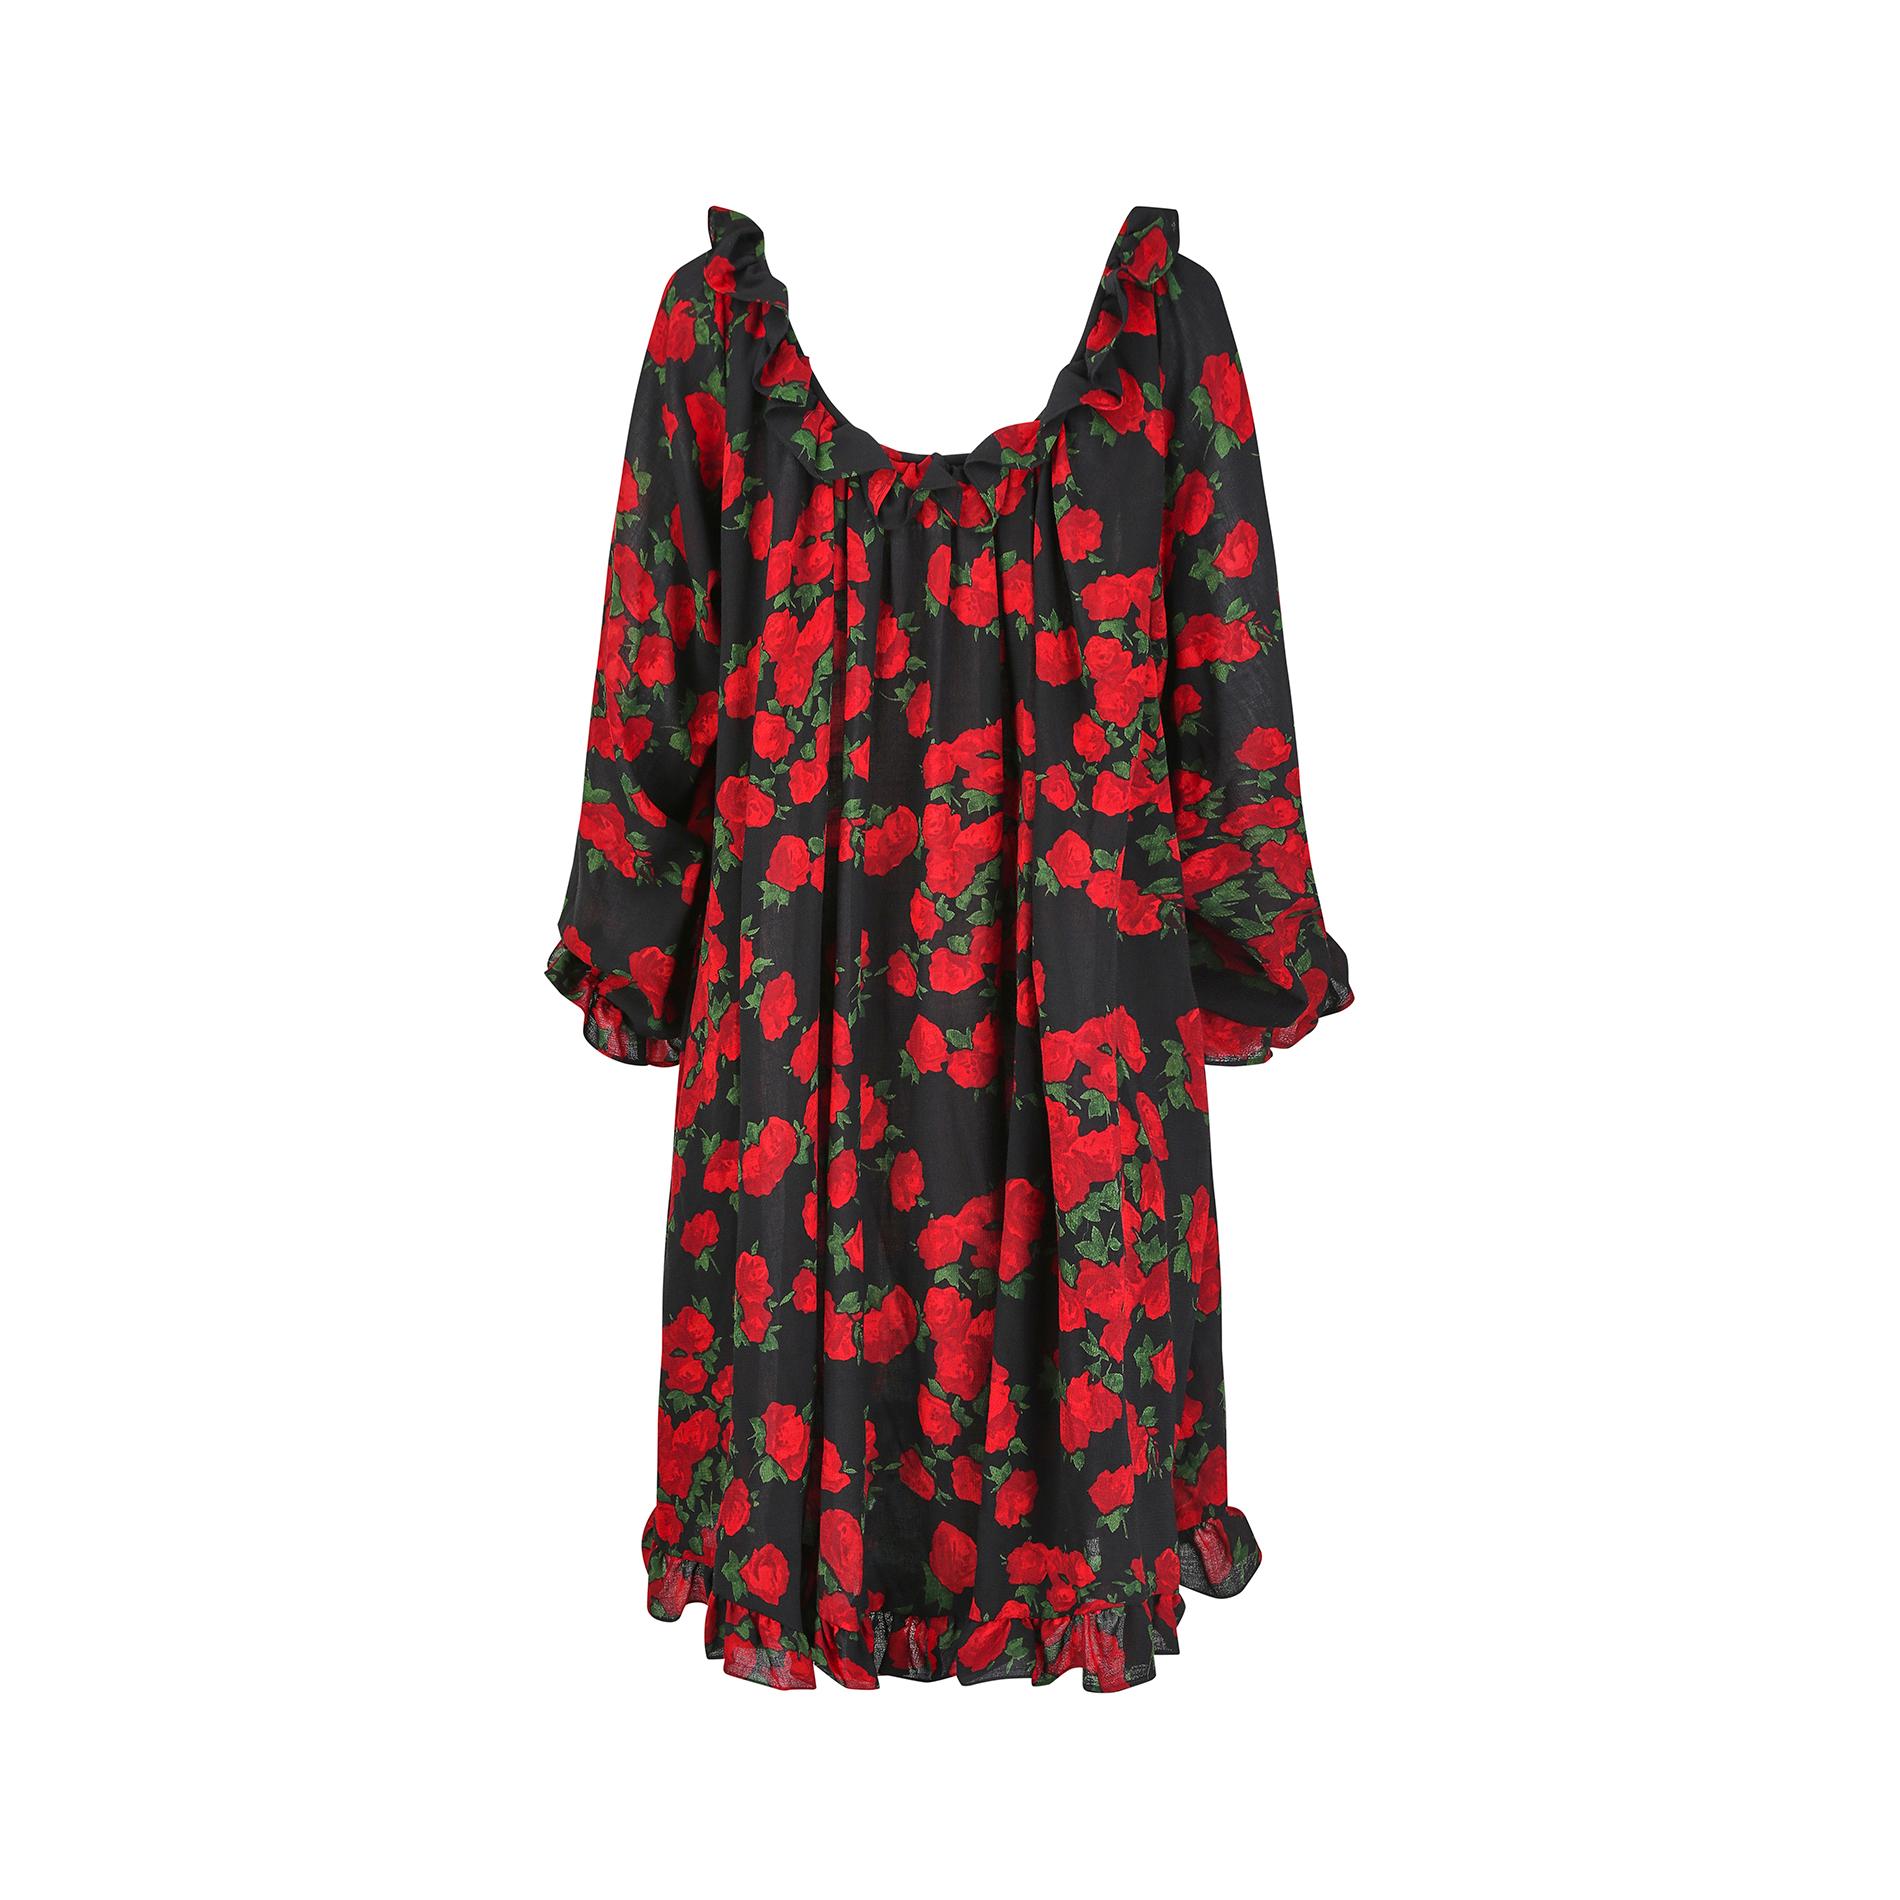 1994 Yves Saint Laurent Rose Print Wool Dress In Excellent Condition For Sale In London, GB